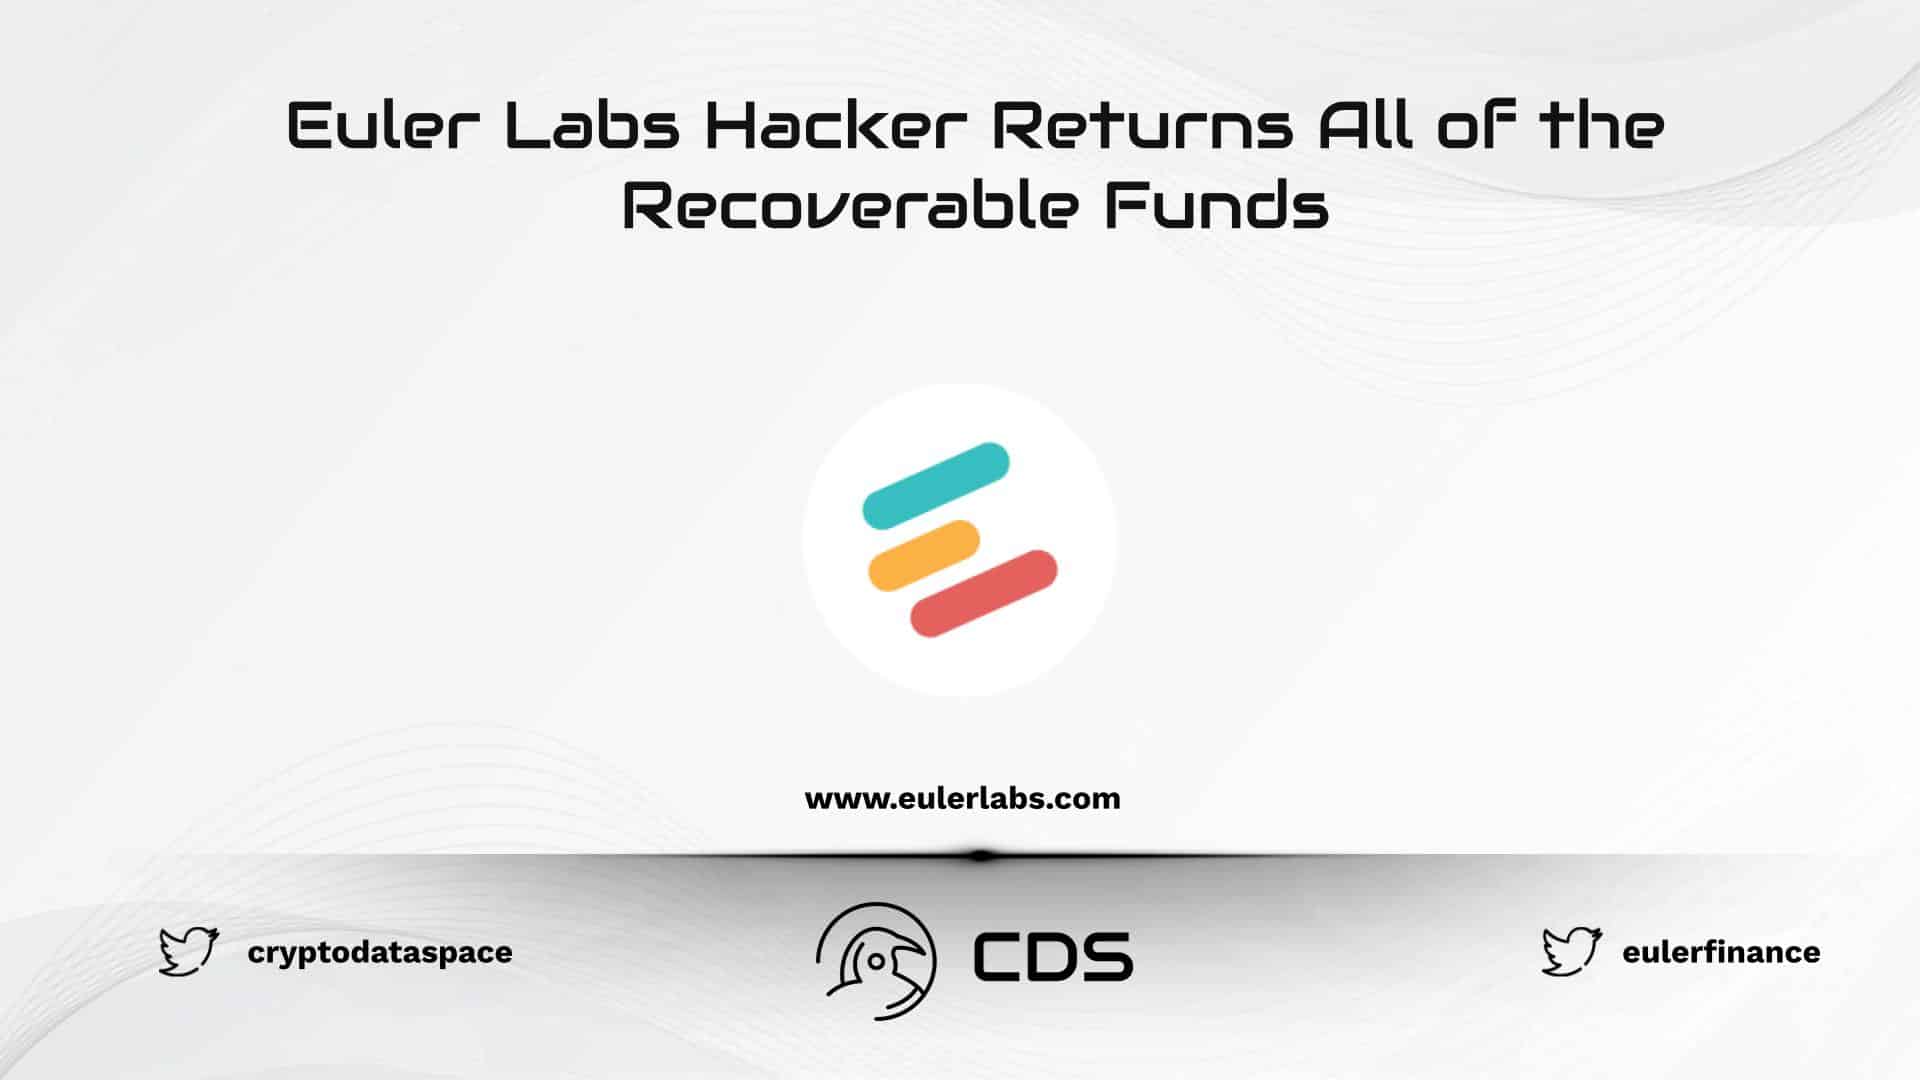 Euler Labs Hacker Returns All of the Recoverable Funds